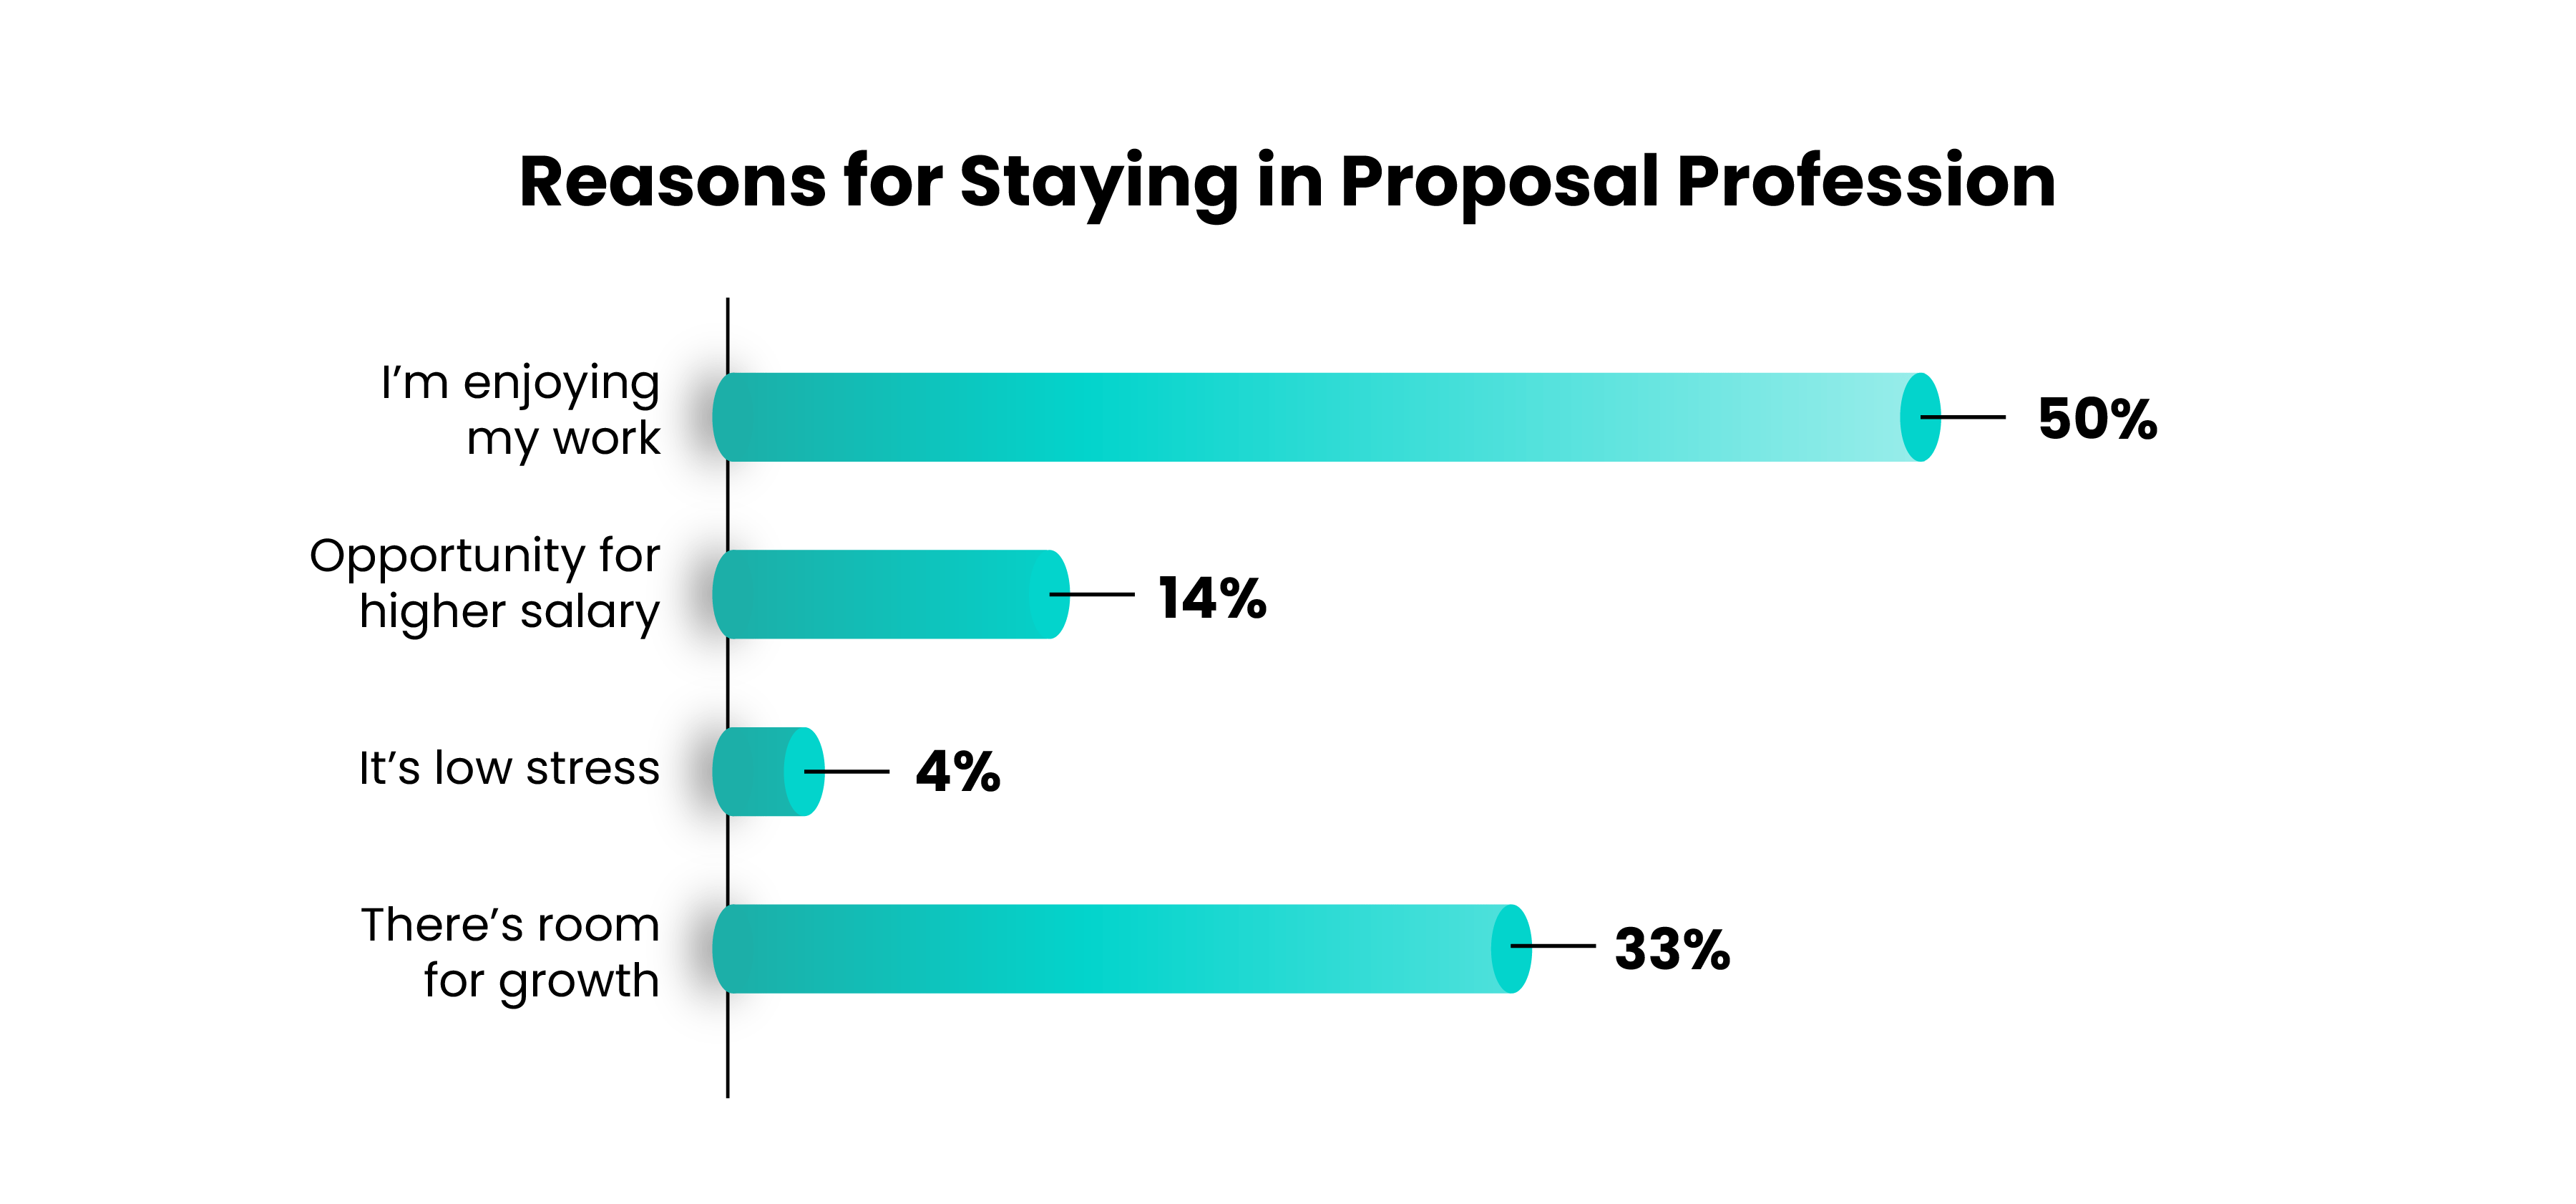 Reasons for staying in proposal profession